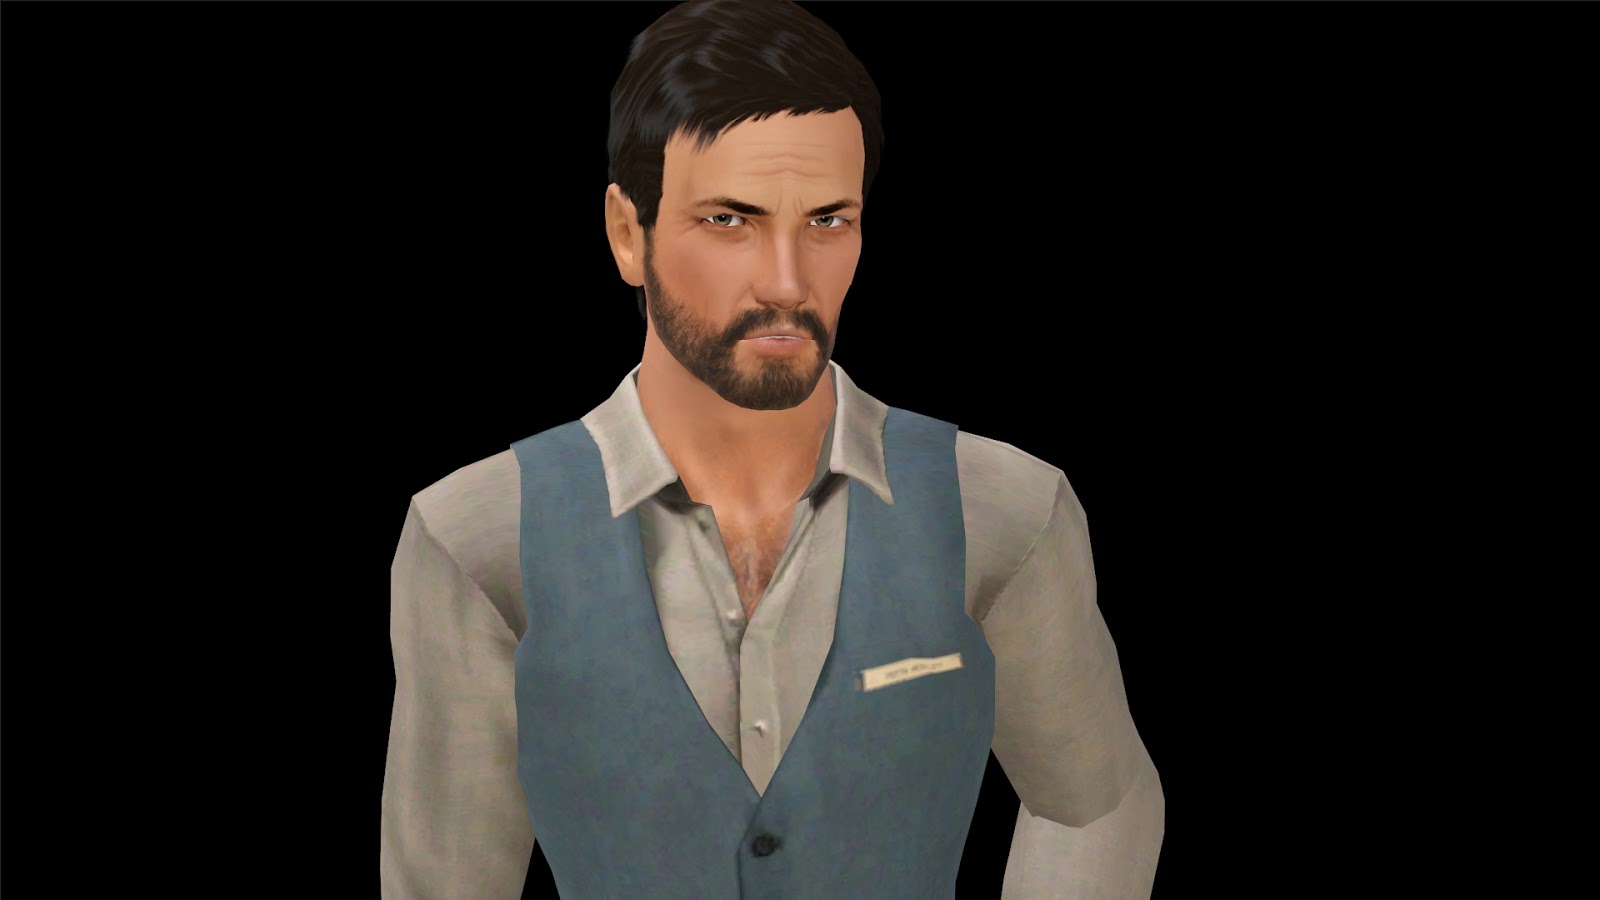 My Sims 3 Blog: Joel (The Last of Us) by Chobits